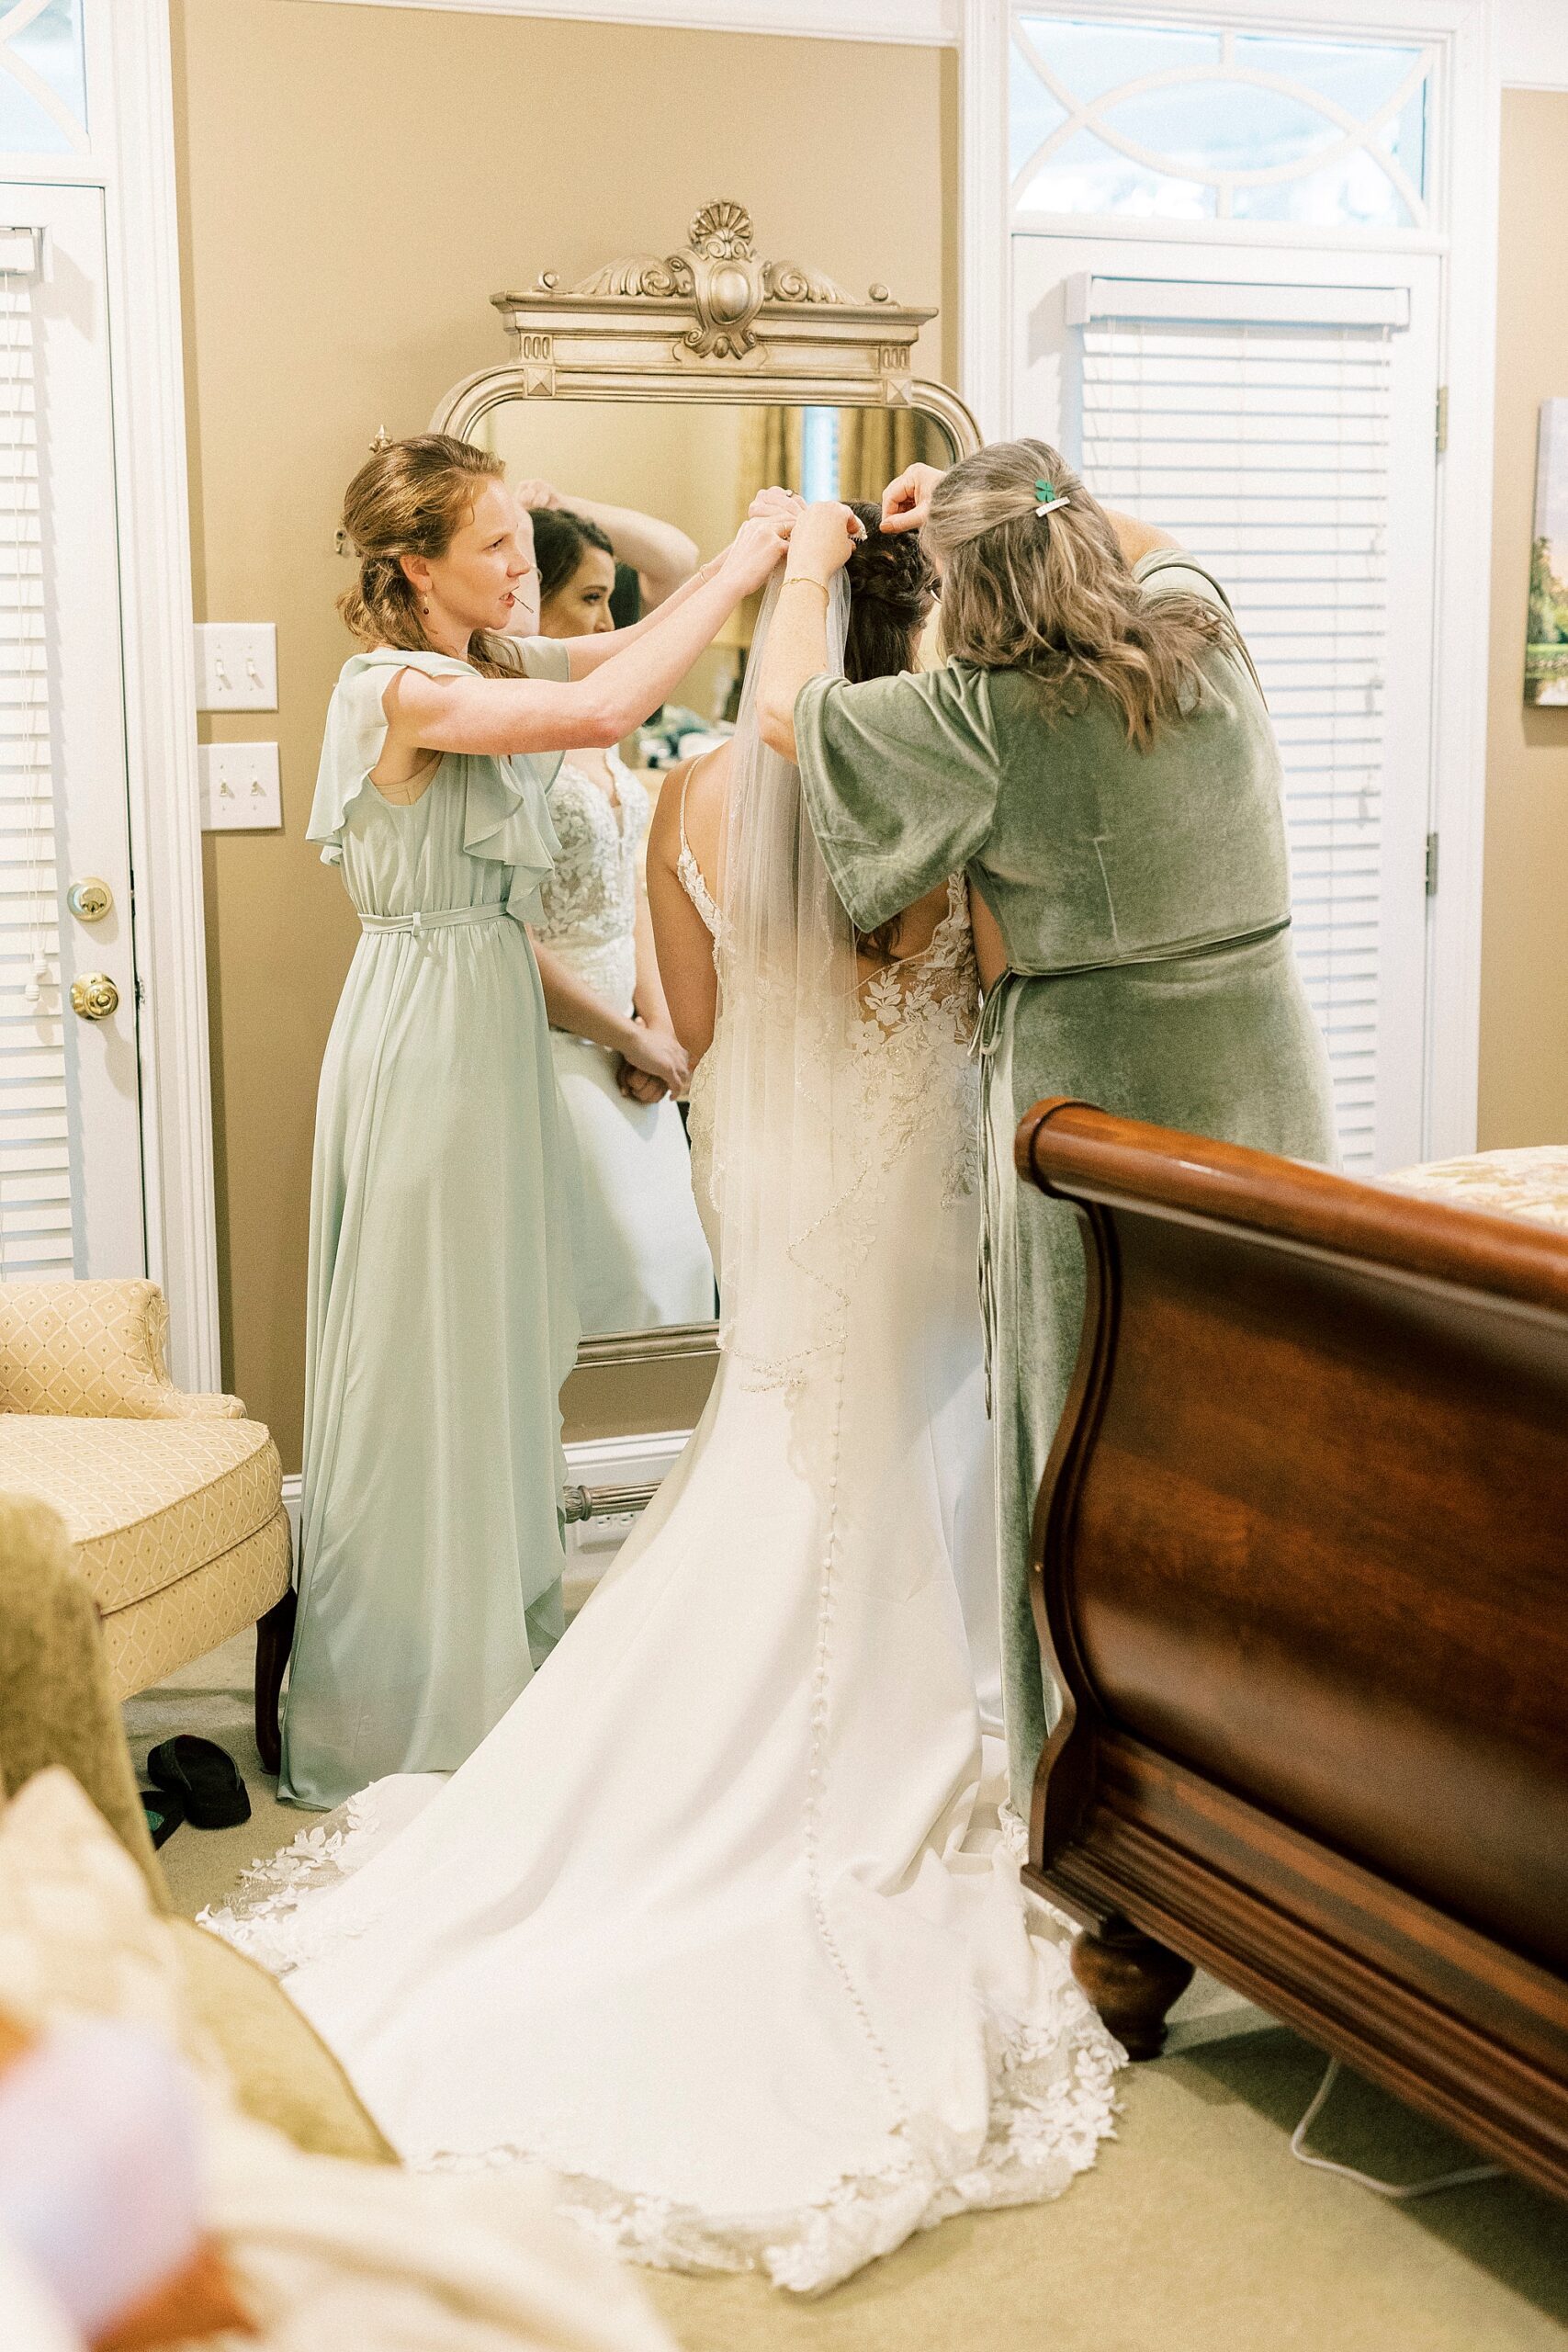 mother and bridesmaids help pin veil on bride's head 